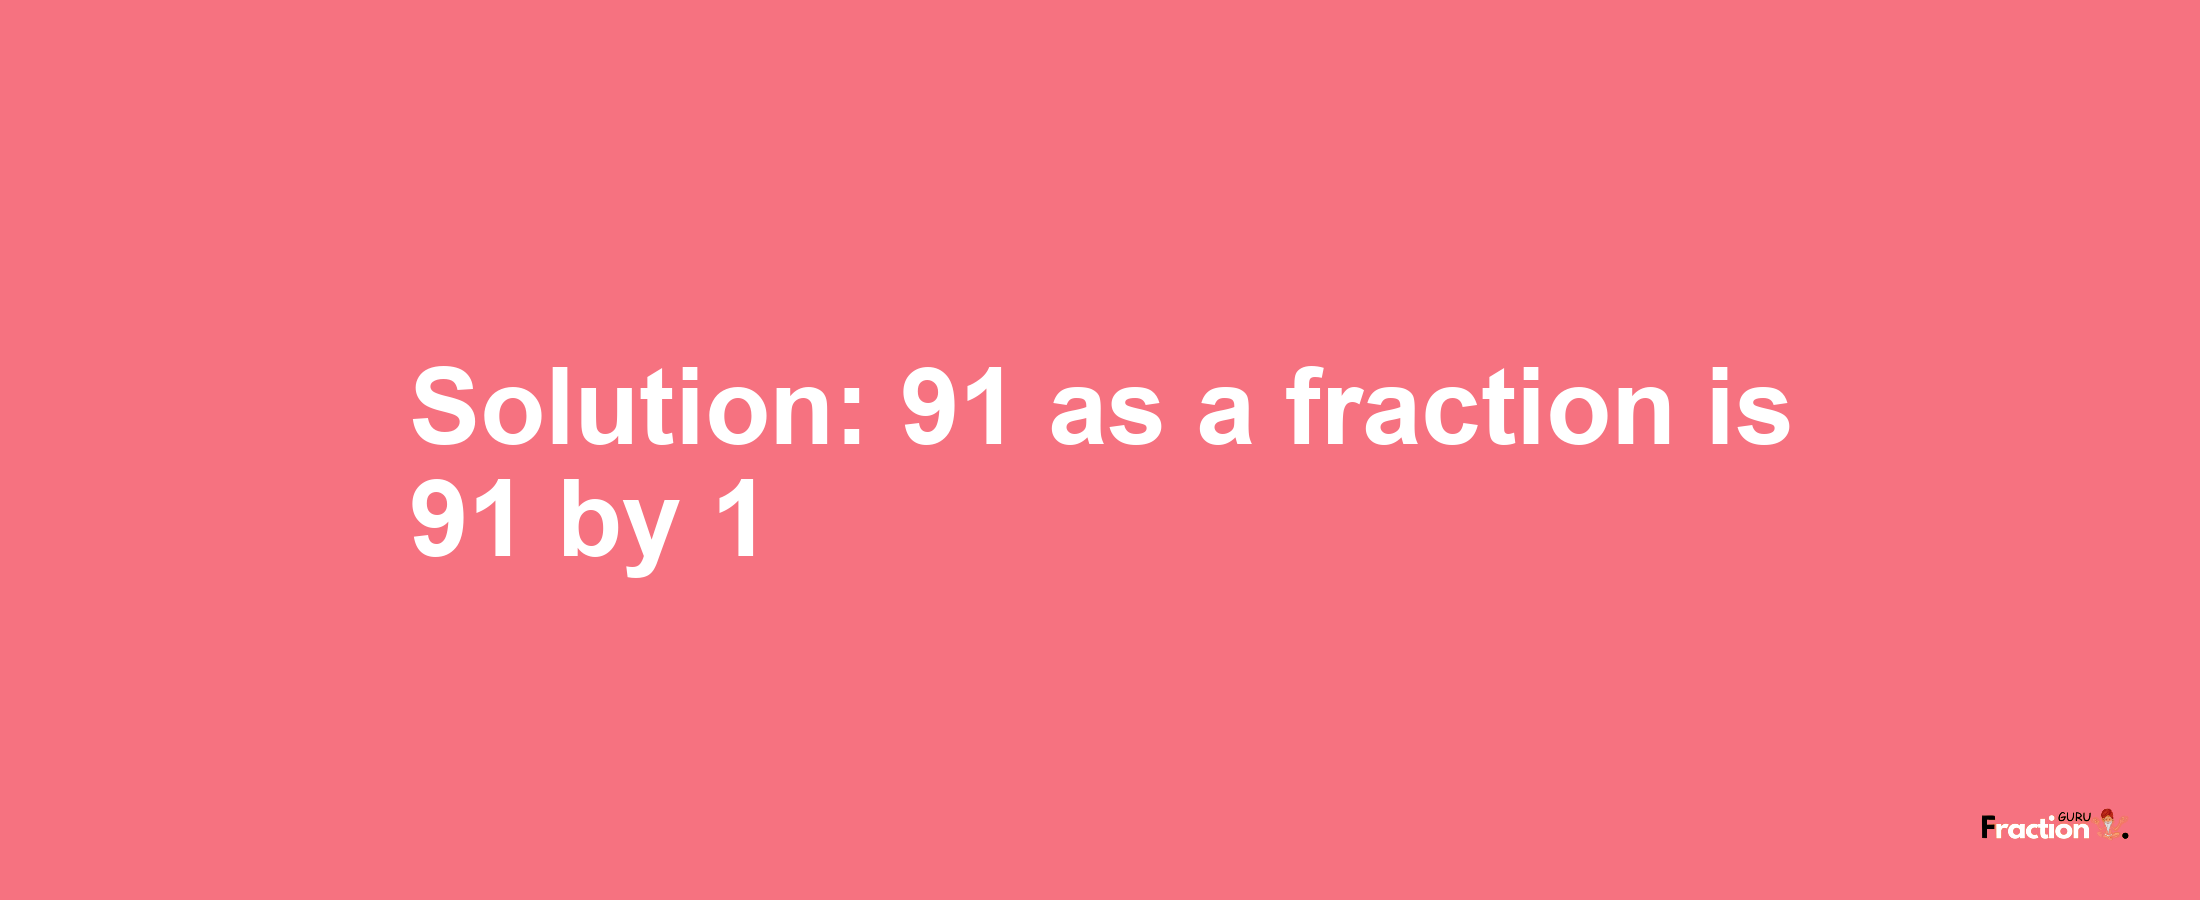 Solution:91 as a fraction is 91/1